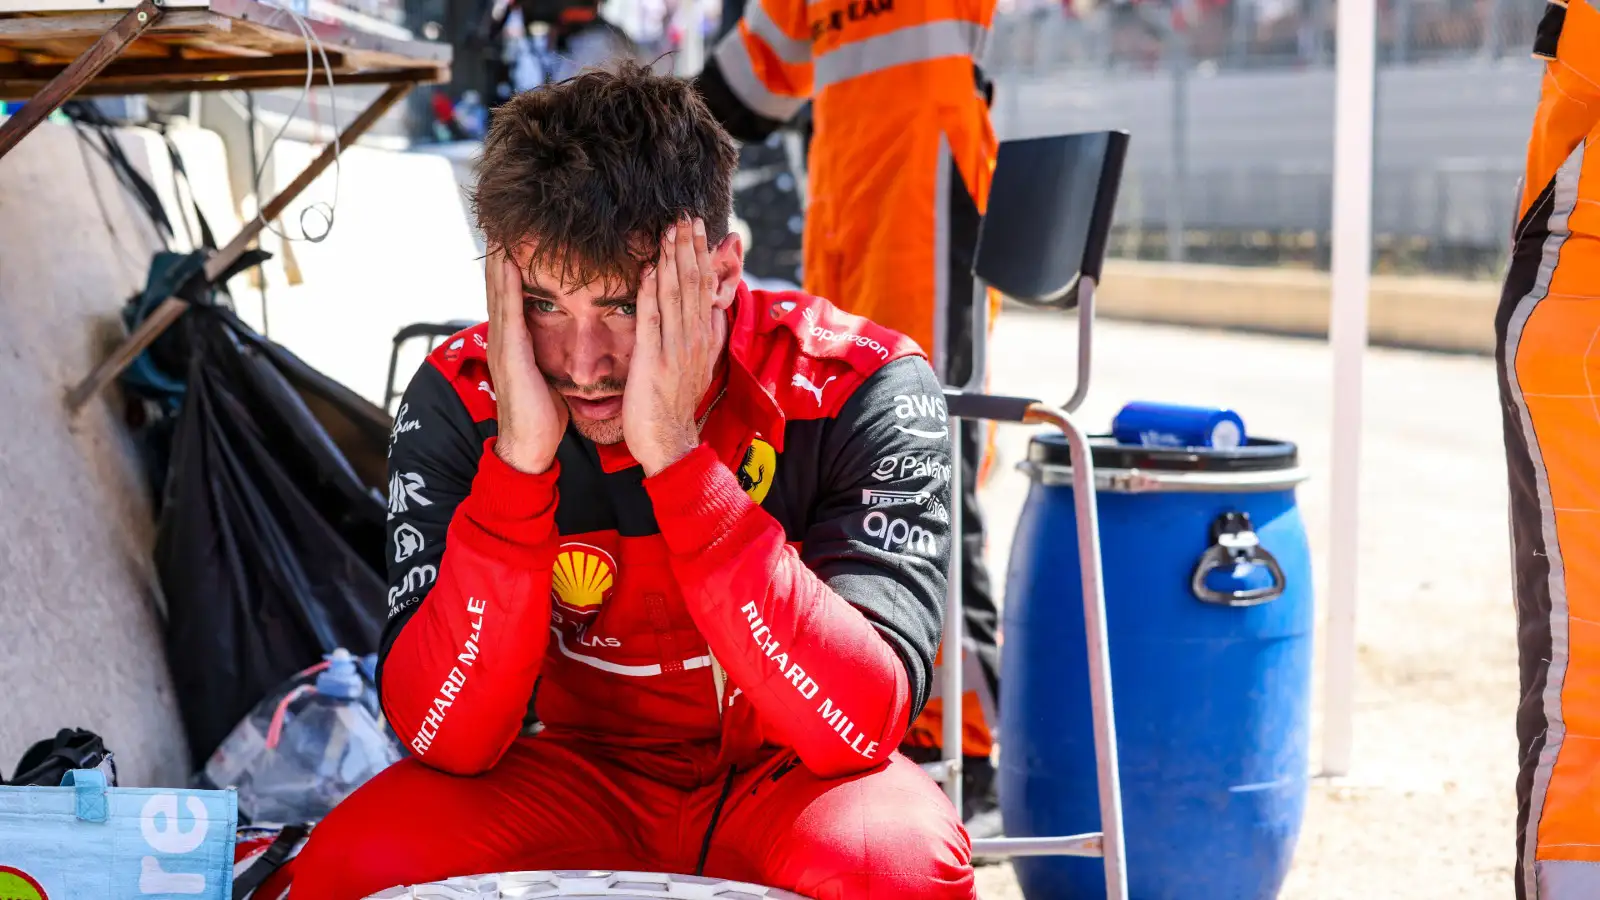 Ferrari's Charles Leclerc disappointed at the French Grand Prix. Paul Ricard, July 2022.